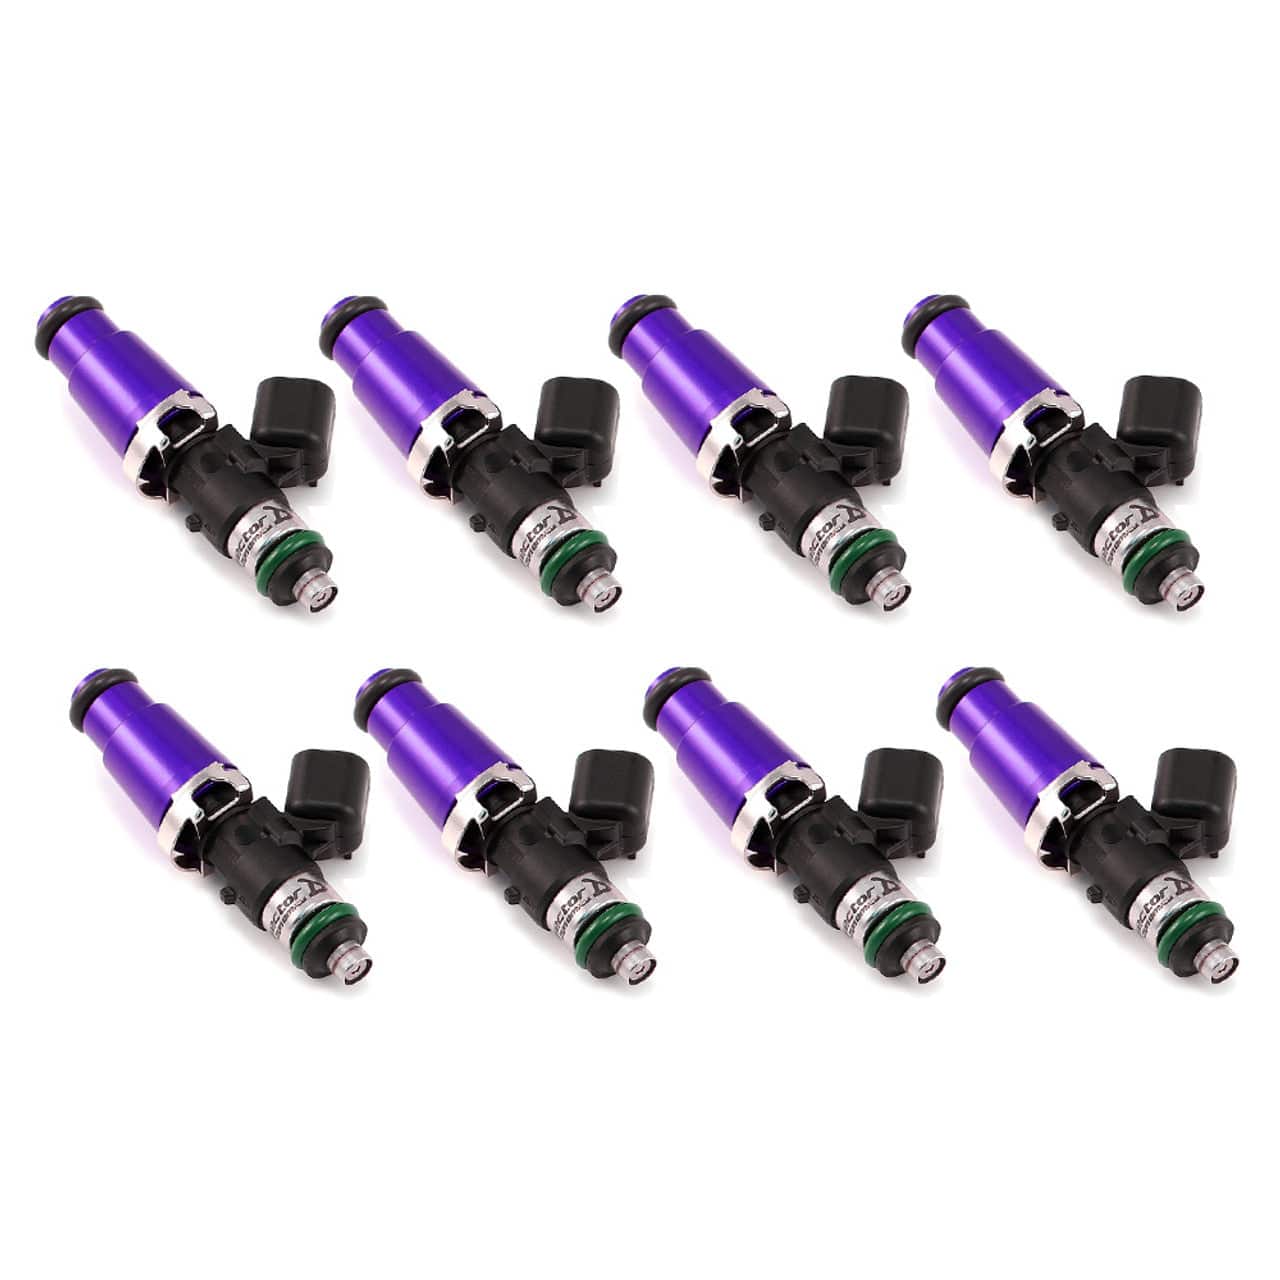 Injector Dynamics ID1050x, for BMW E90 / E92 / E93 M3 2007+, 14mm (grey) adaptor top. Set of 8.